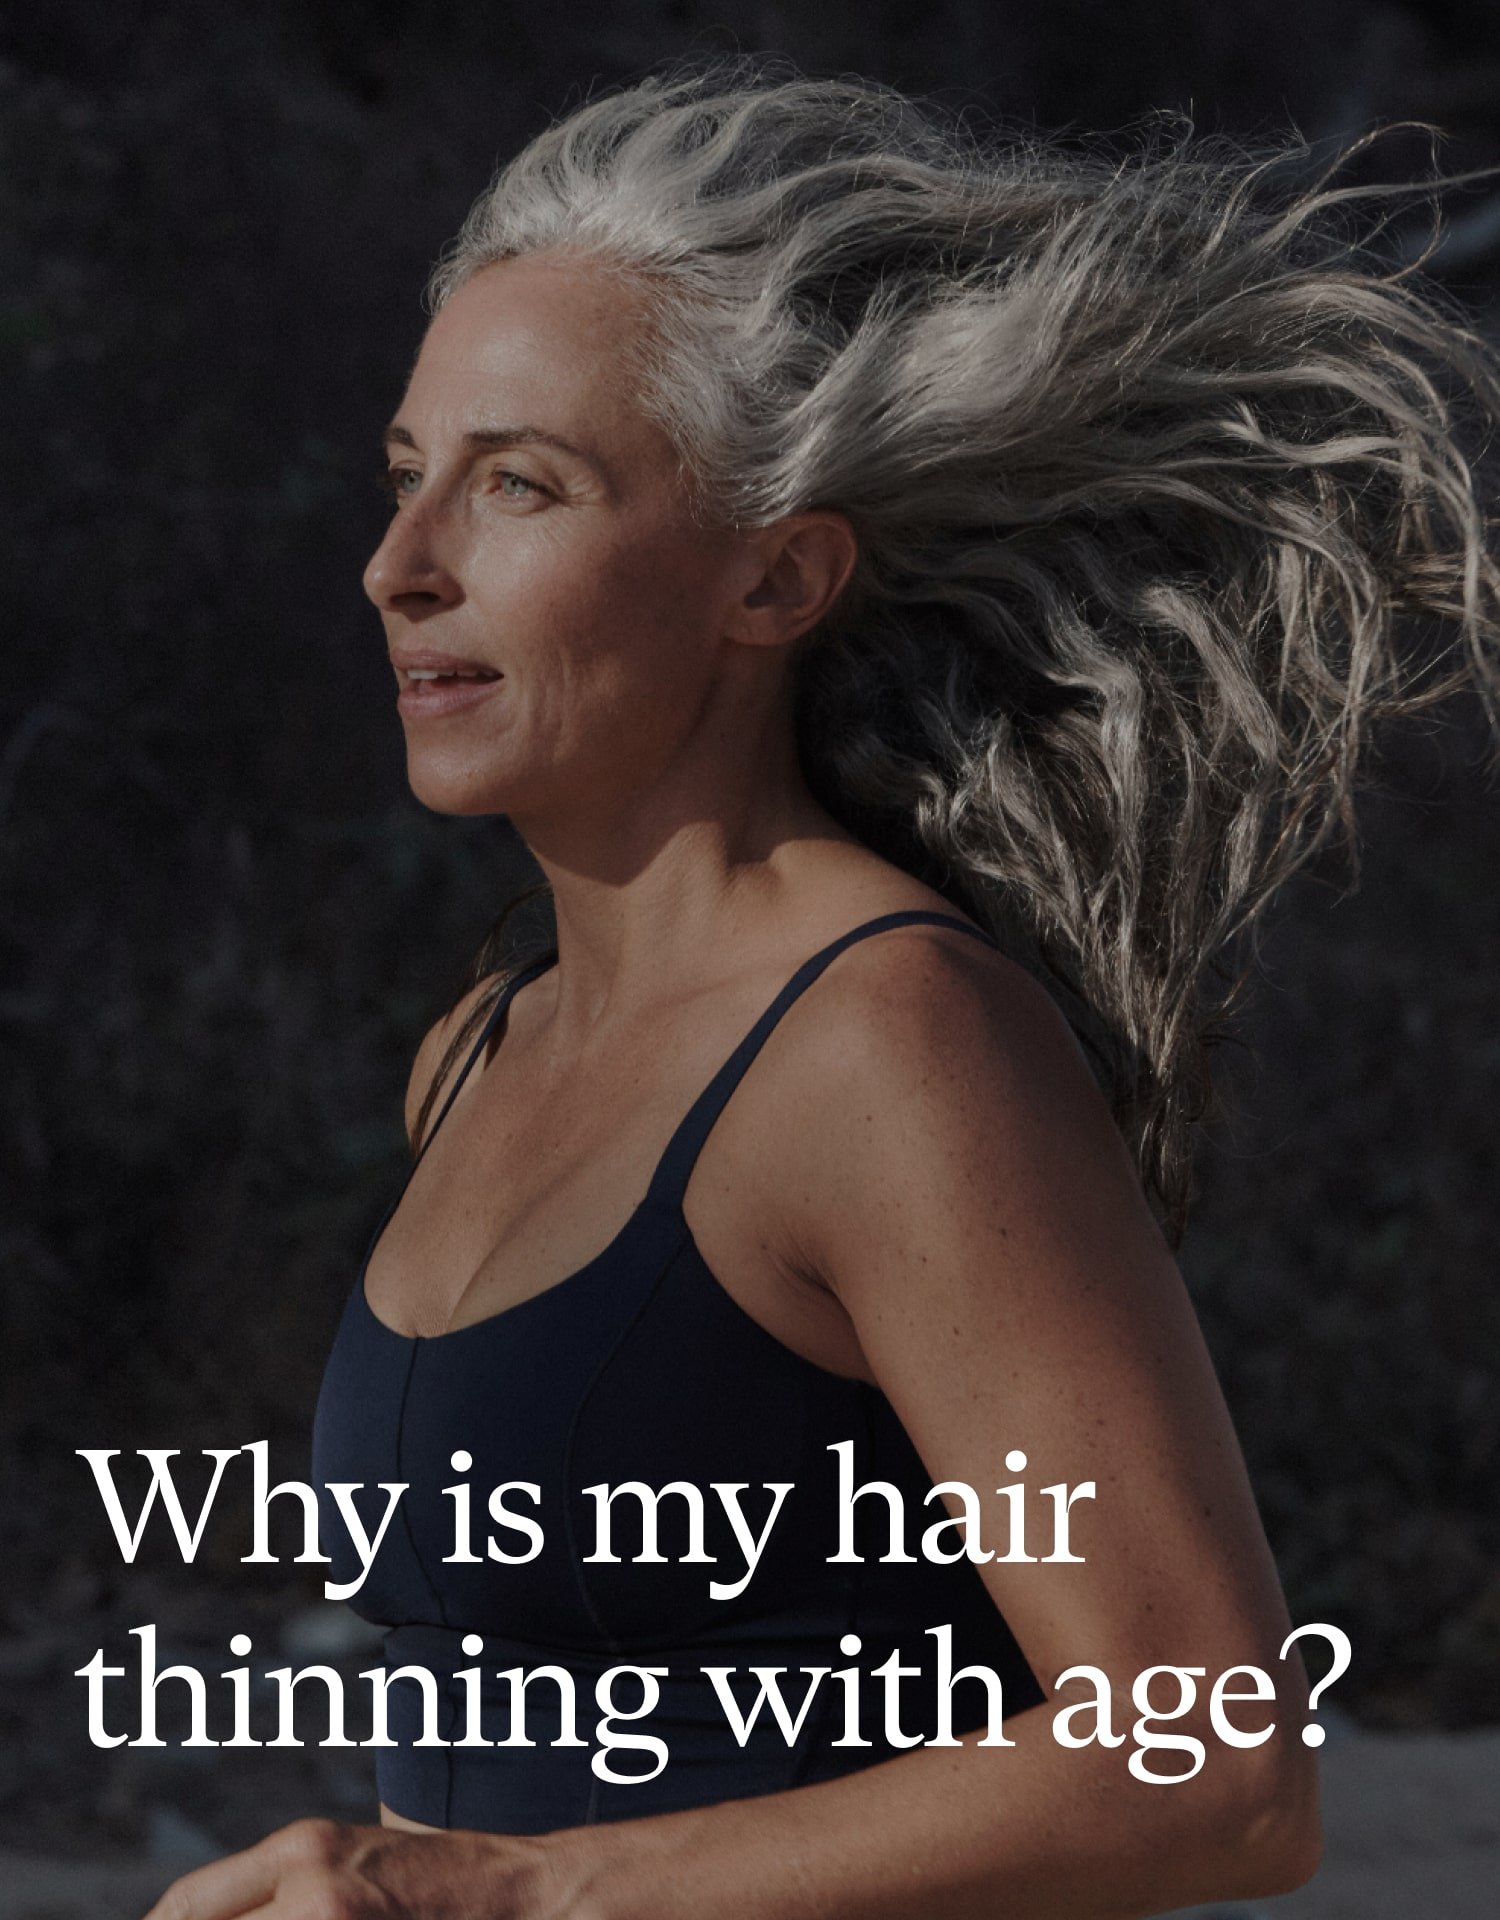 Why is my hair thinning with age?